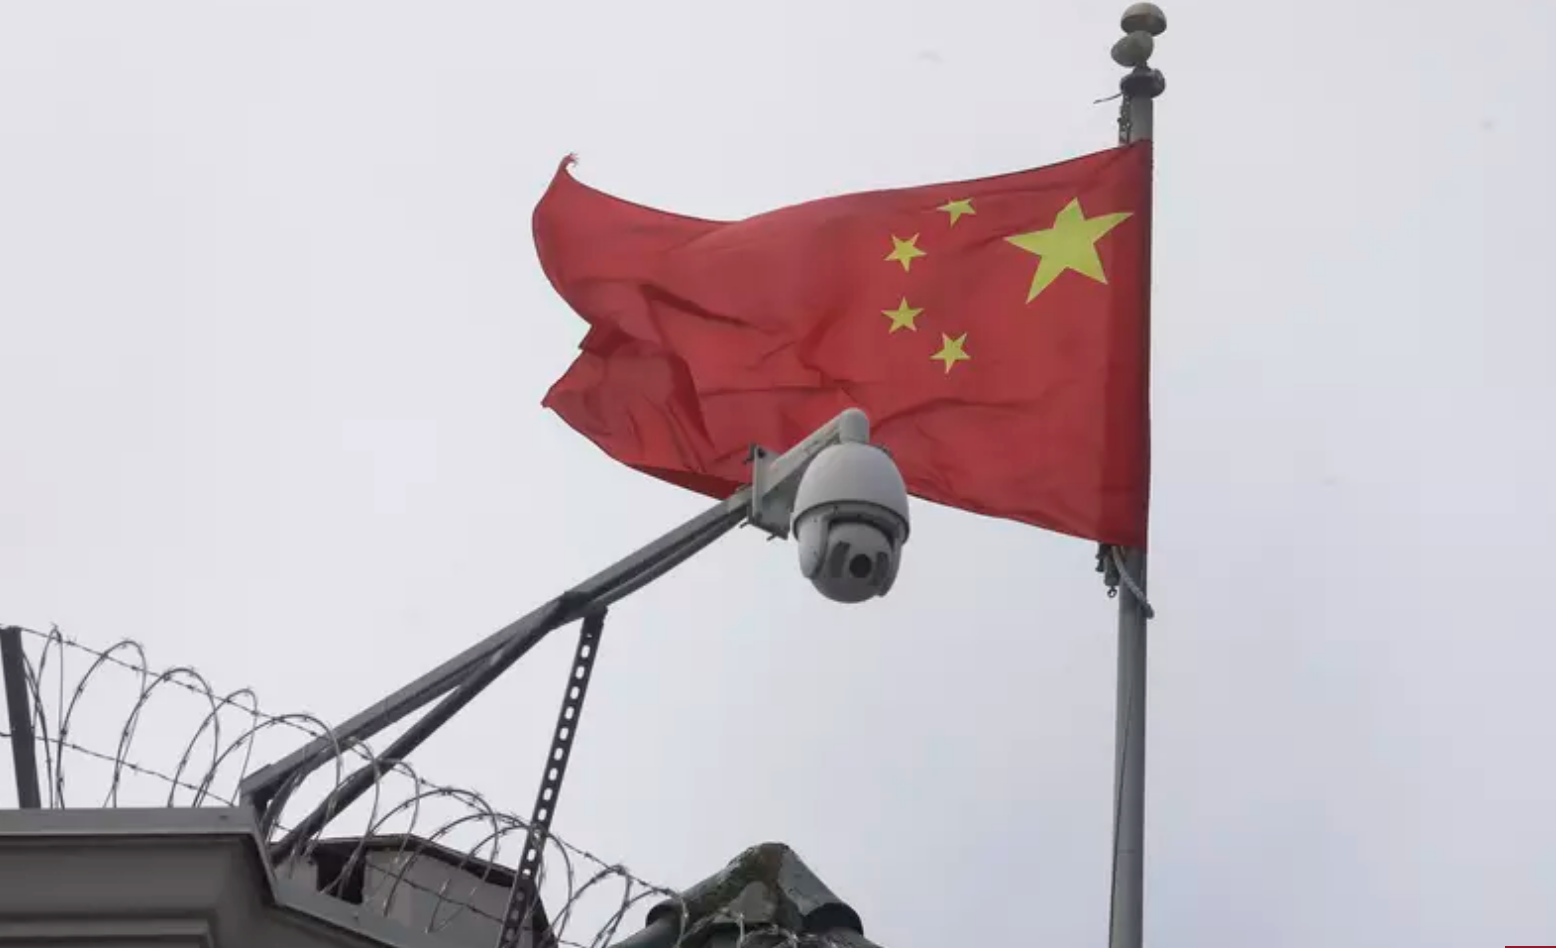 Featured image for “Revisiting Religious Freedom as a National Security Lens: The Case of China”